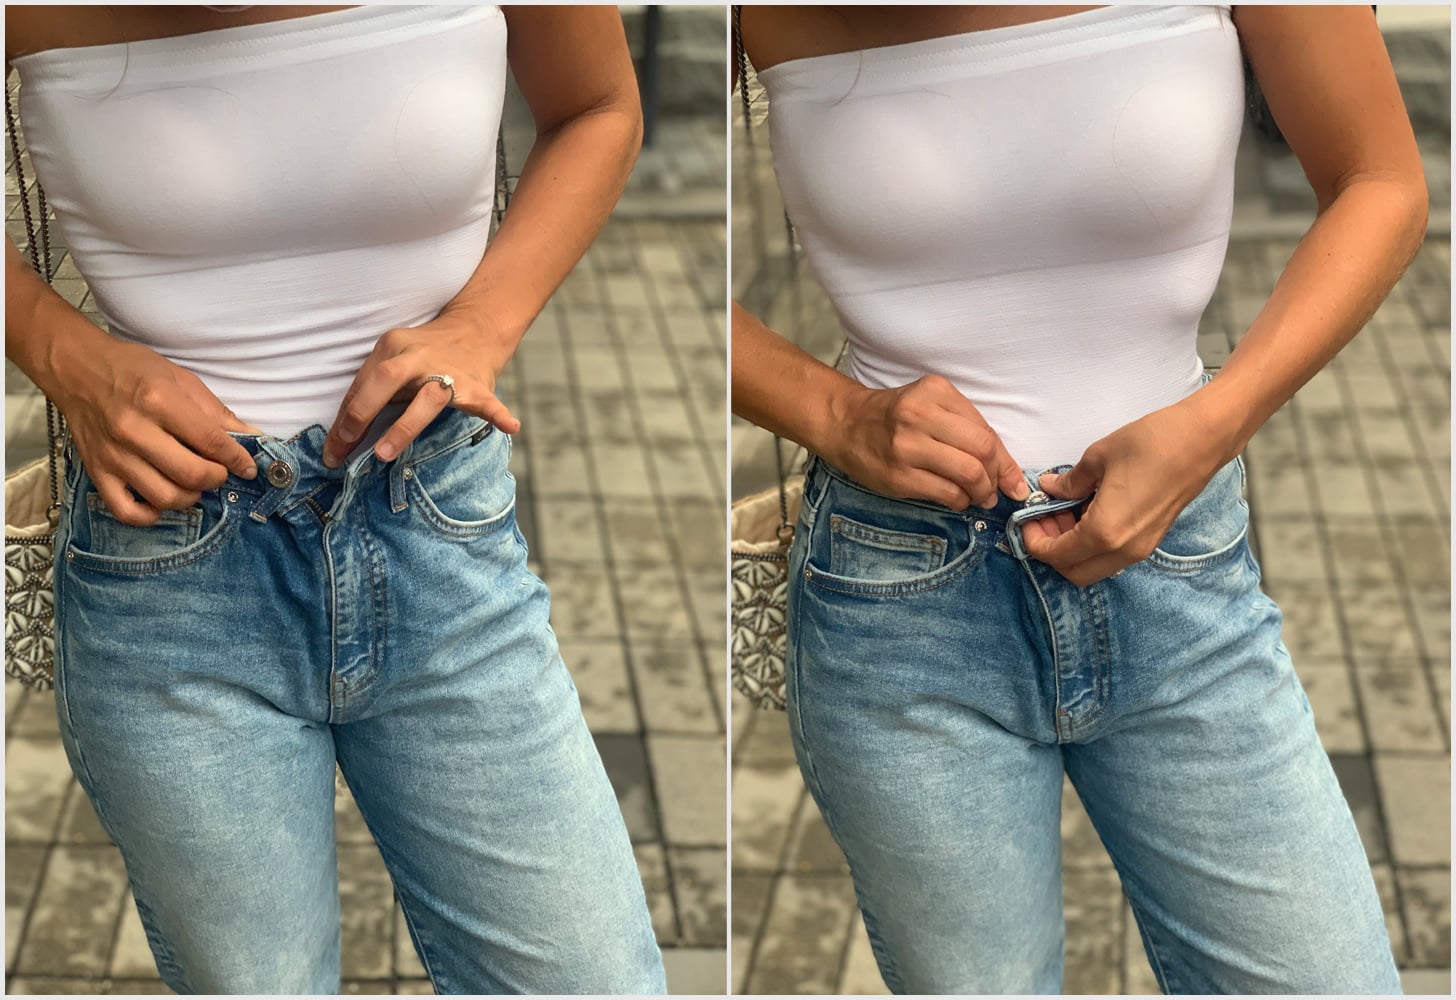 The Latest TikTok Hack To Fitting Jeans Without *Really* Trying Them On